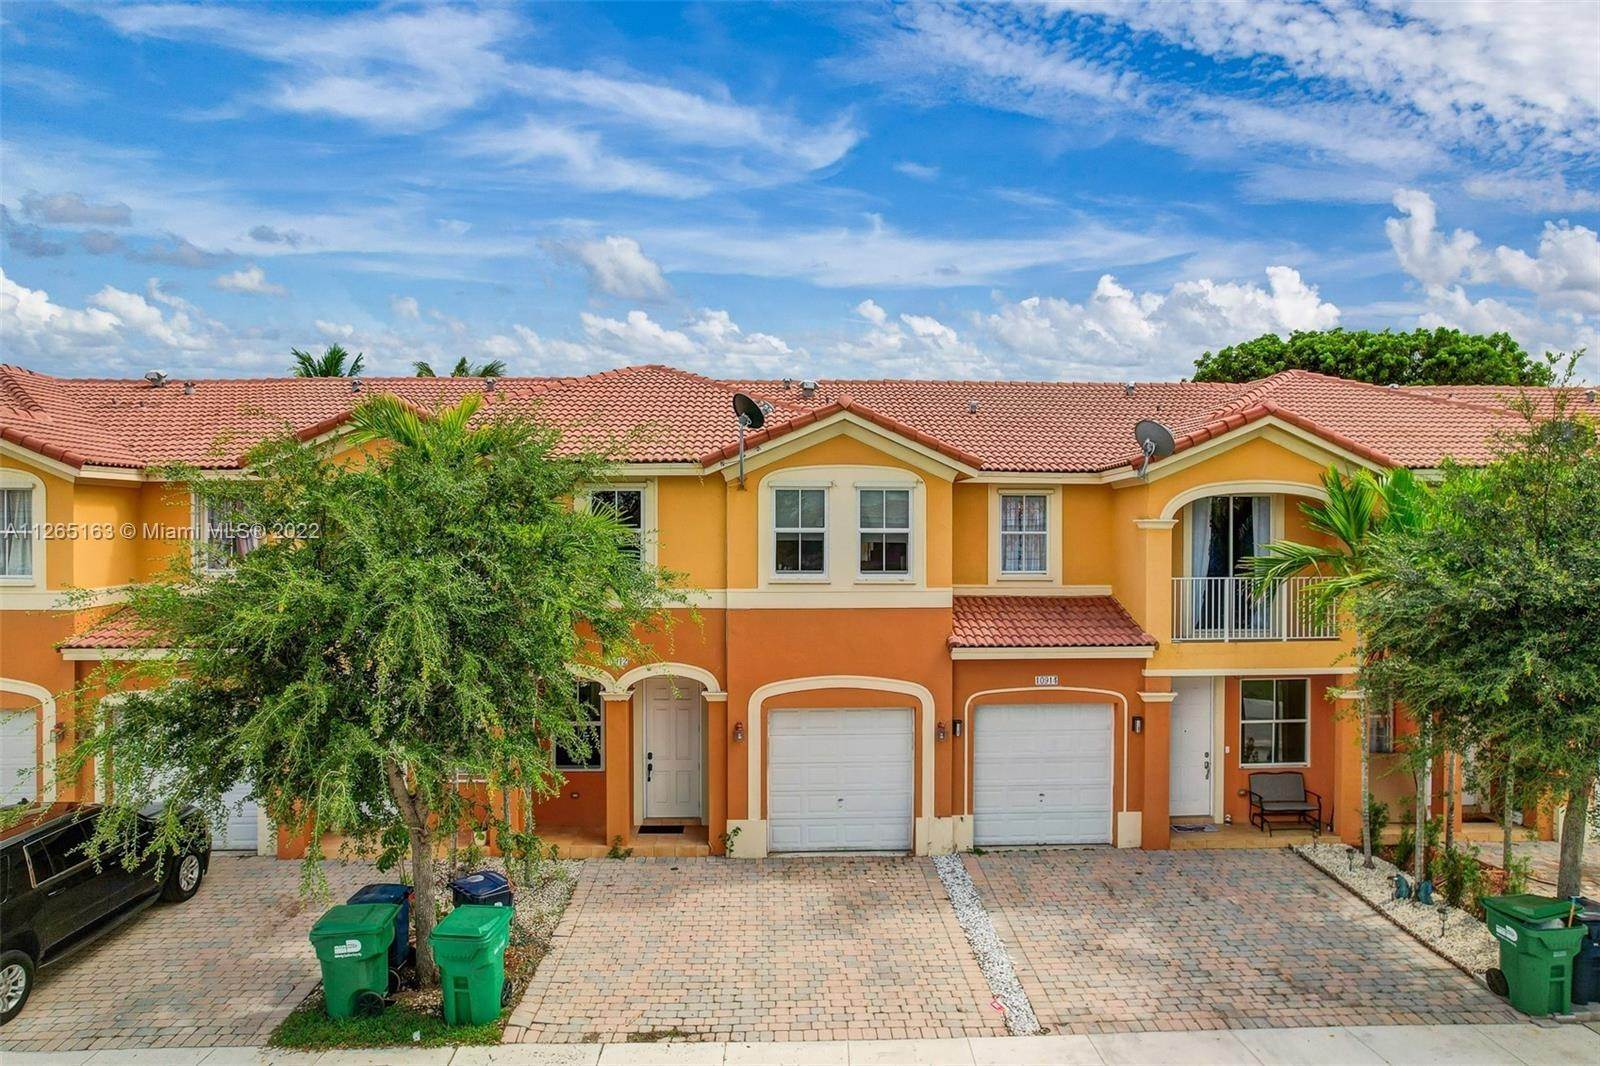 Townhouse for Sale at Homestead, FL 33032